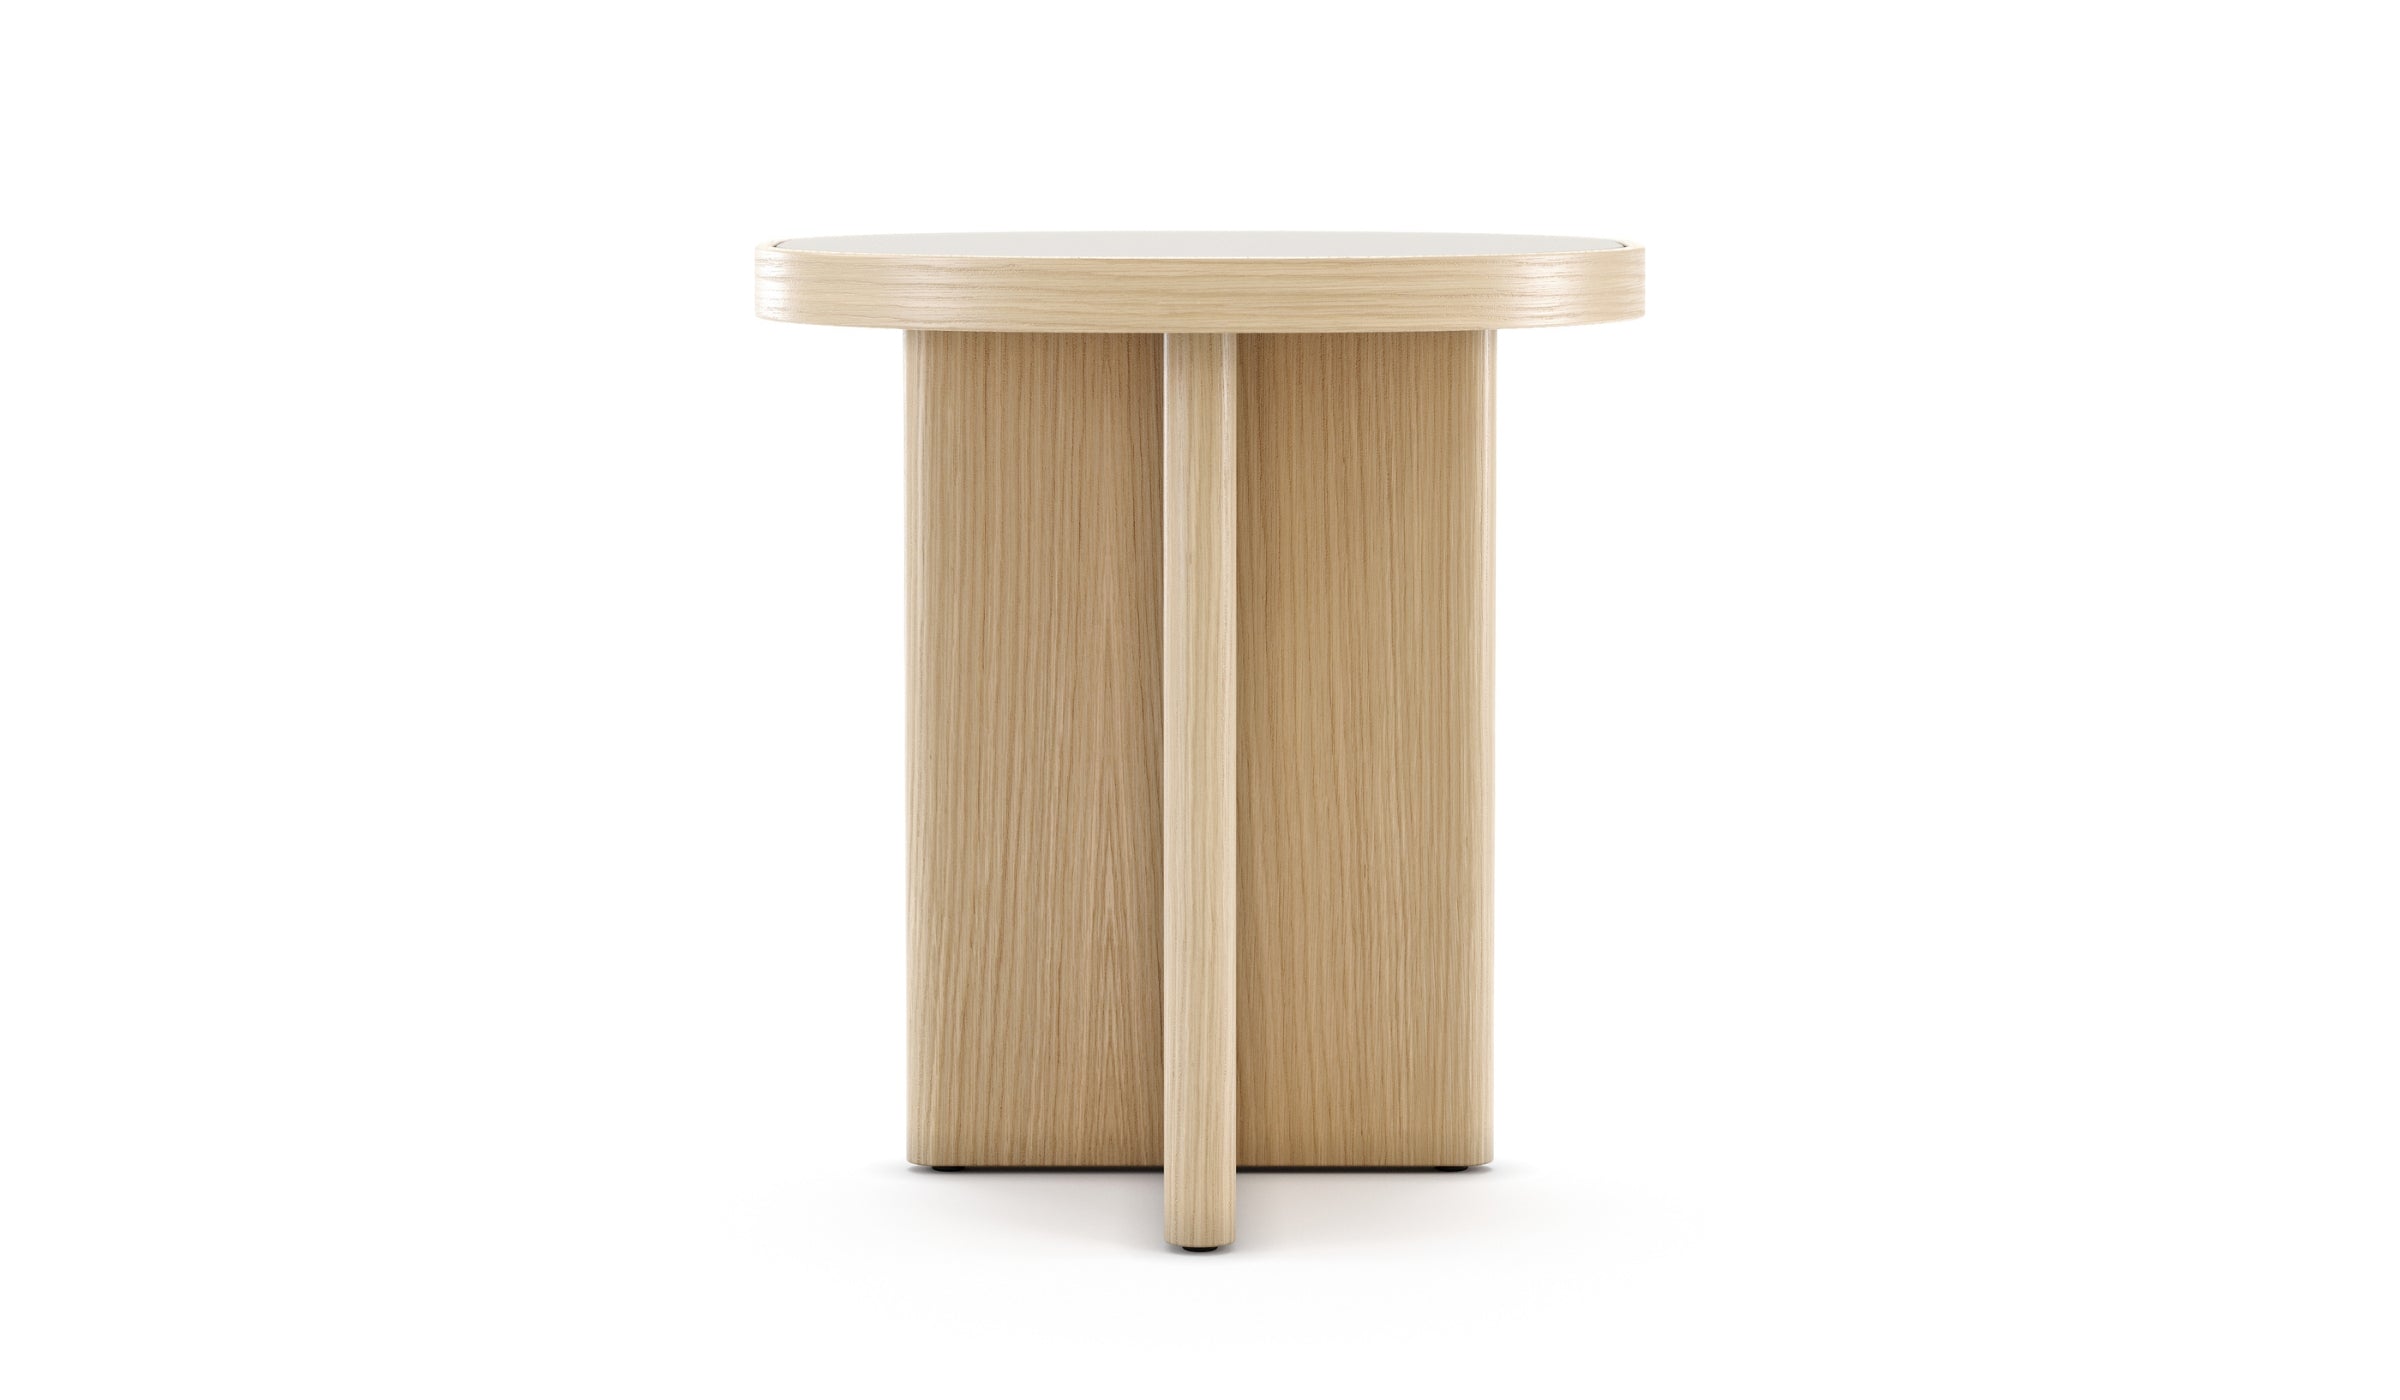 Gilbert - Table d'appoint, chêne naturel, laqué taupe, S